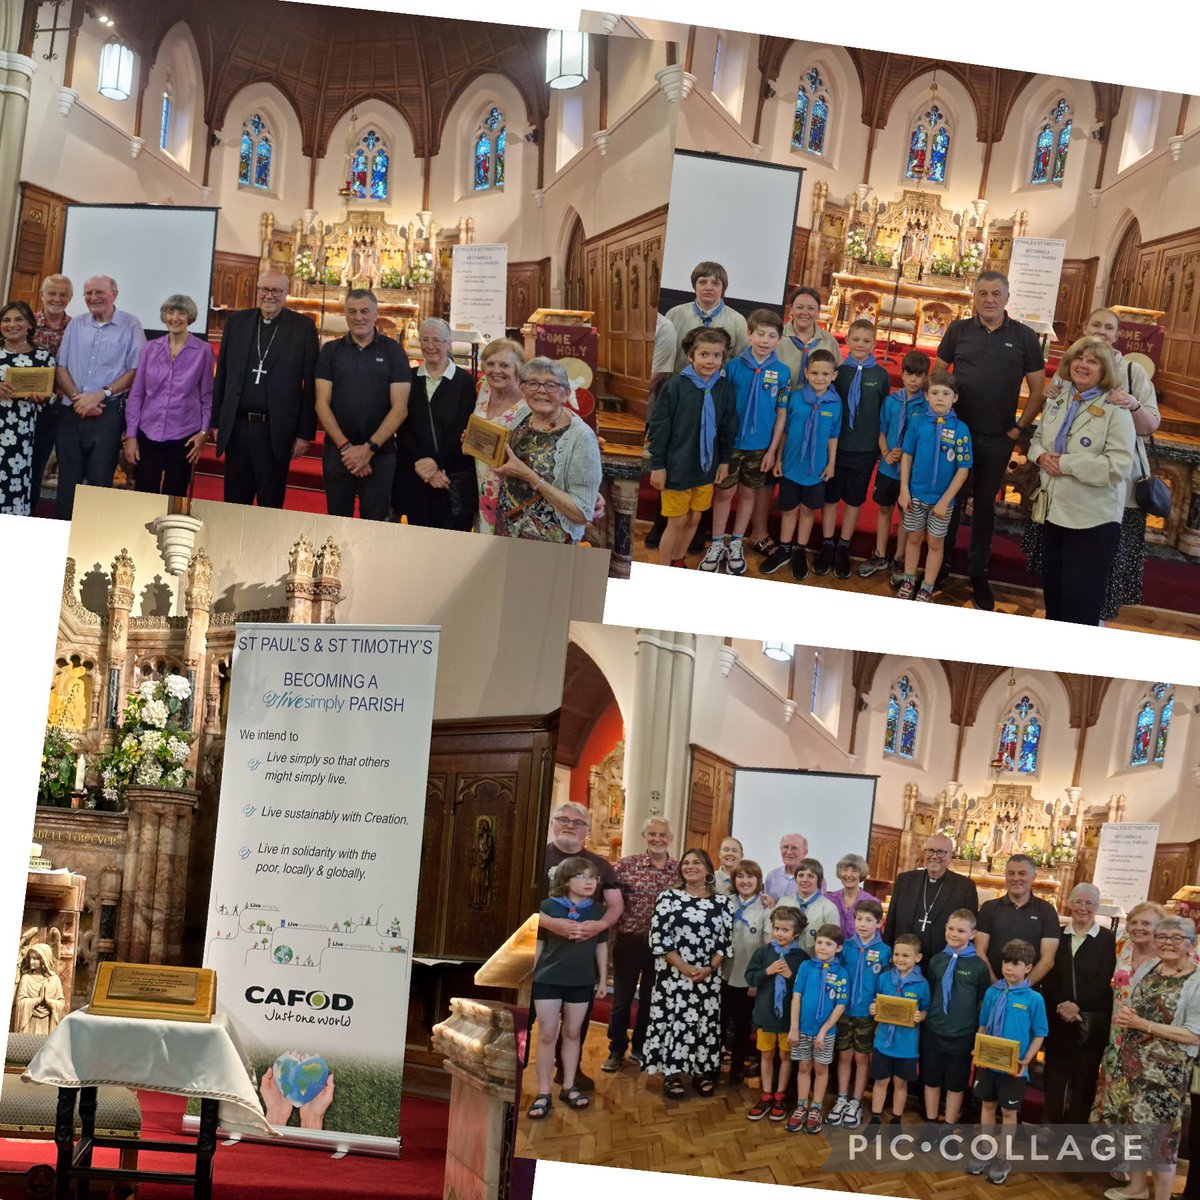 A lovely evening at the presentation of @CAFOD LiveSimply Award to St Paul’s & St Timothy’s by Archbishop Malcolm.
Well done to all involved in securing this prestigious award for all the fantastic community efforts outlined tonight👏👏
#WestDerby